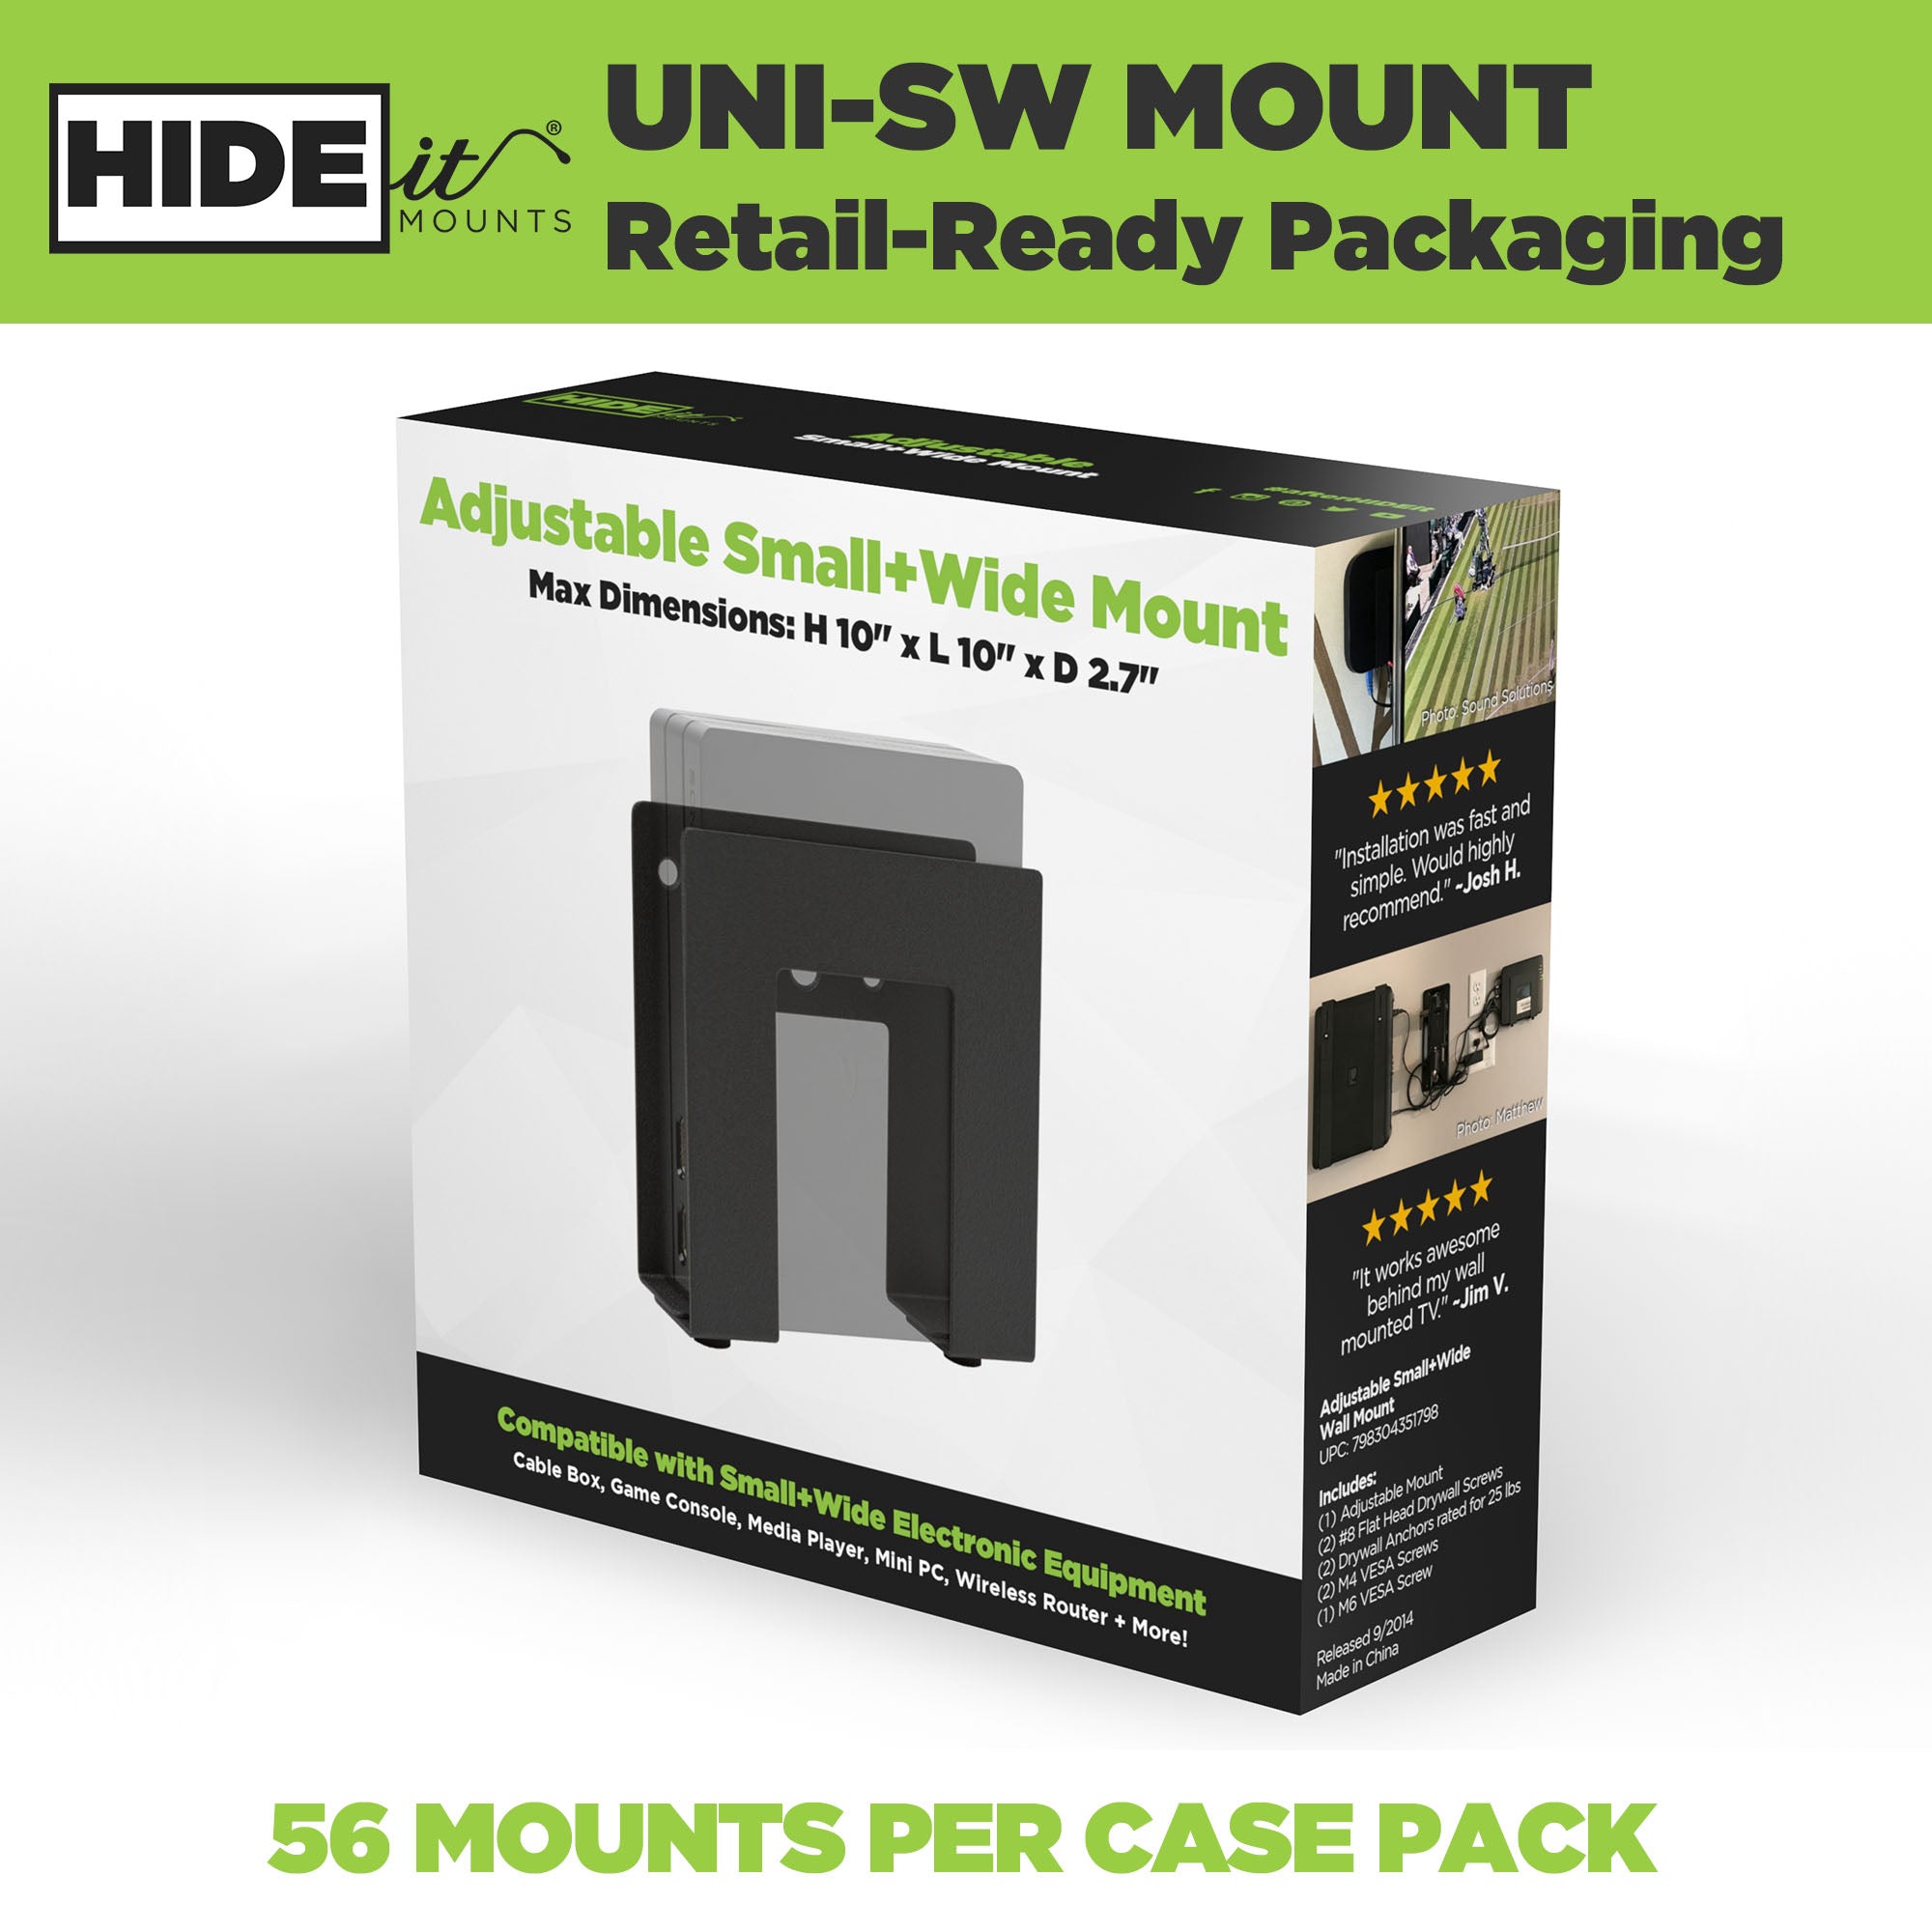 W - HIDEit Uni-SW Retail Packaging | Universal Small + Wide Electronic + Cable Box Mounts in Retail Packaging